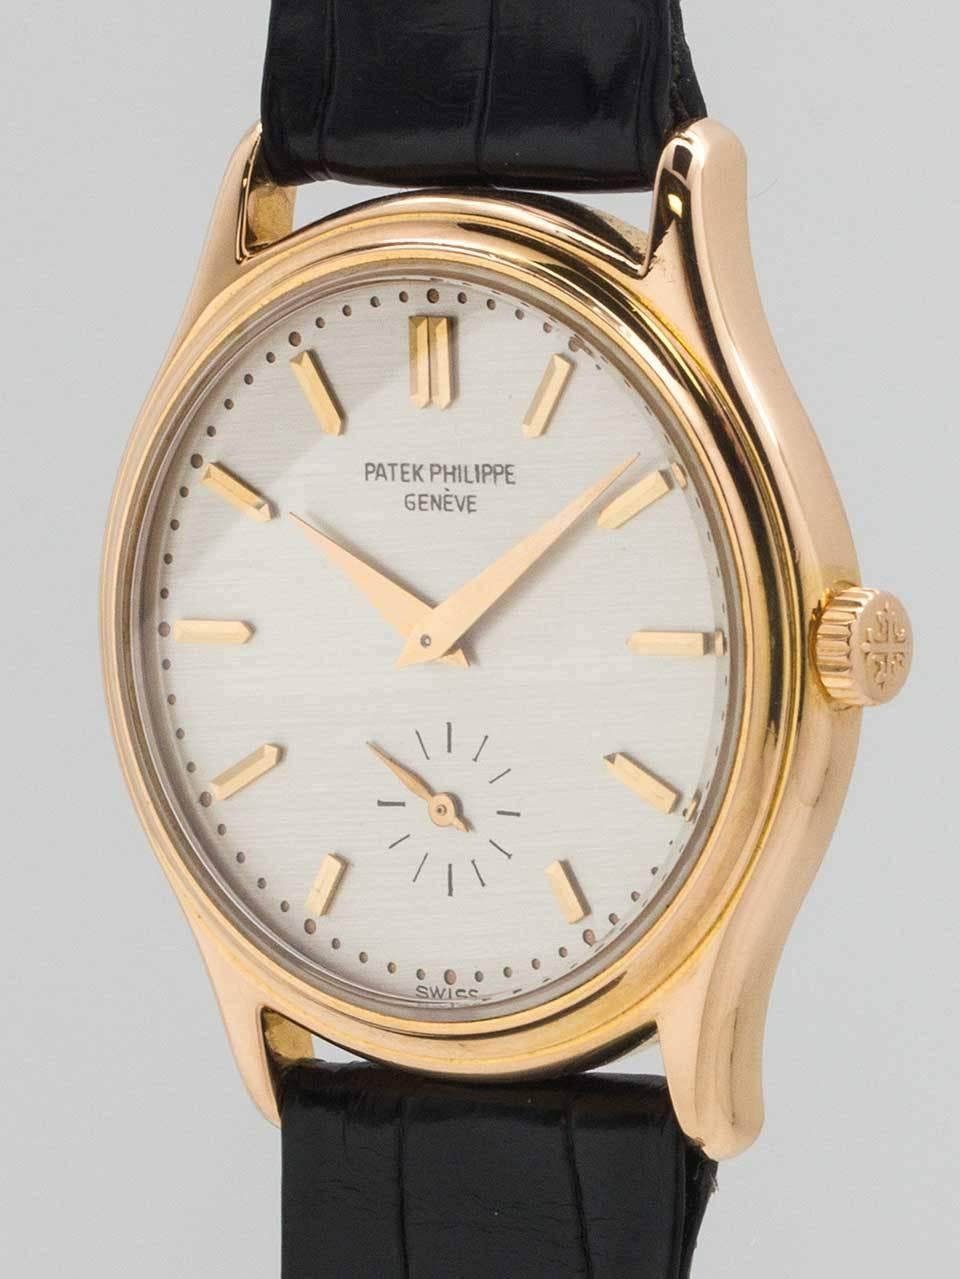 
Patek Philippe 18K Pink Gold dress model ref # 3923 circa 1990’s. 32 X 38mm snap back case with original silvered satin dial with applied pink gold indexes and tapered rose gold sword hands. Powered by 18 jewel manual wind movement with subsidiary